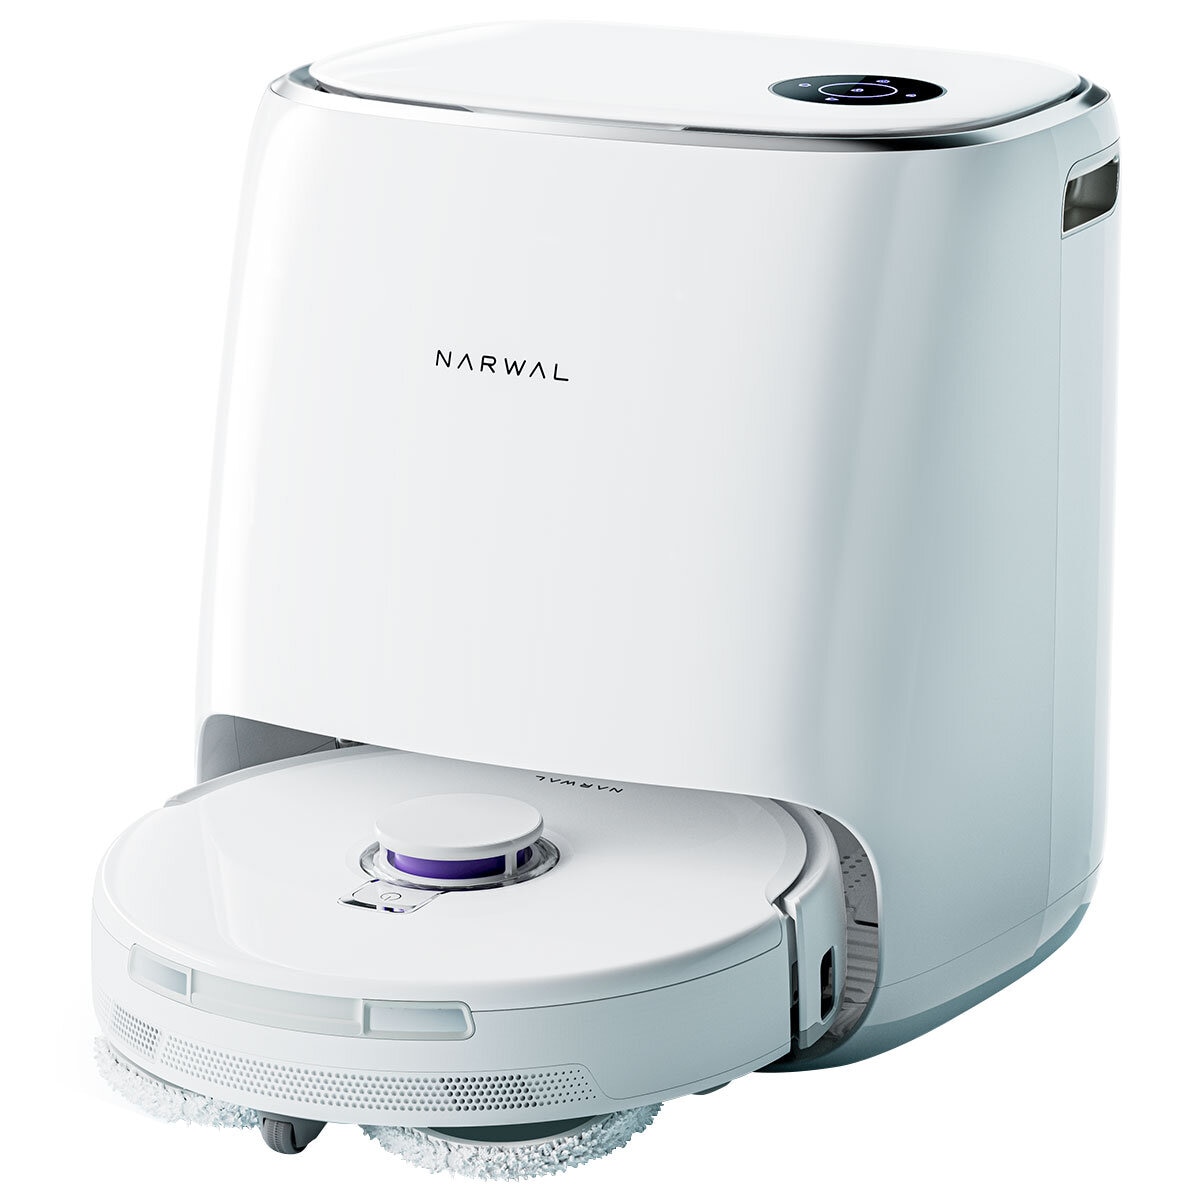 Narwal Freo X Ultra Self Cleaning Vacuuming And Moping Robot